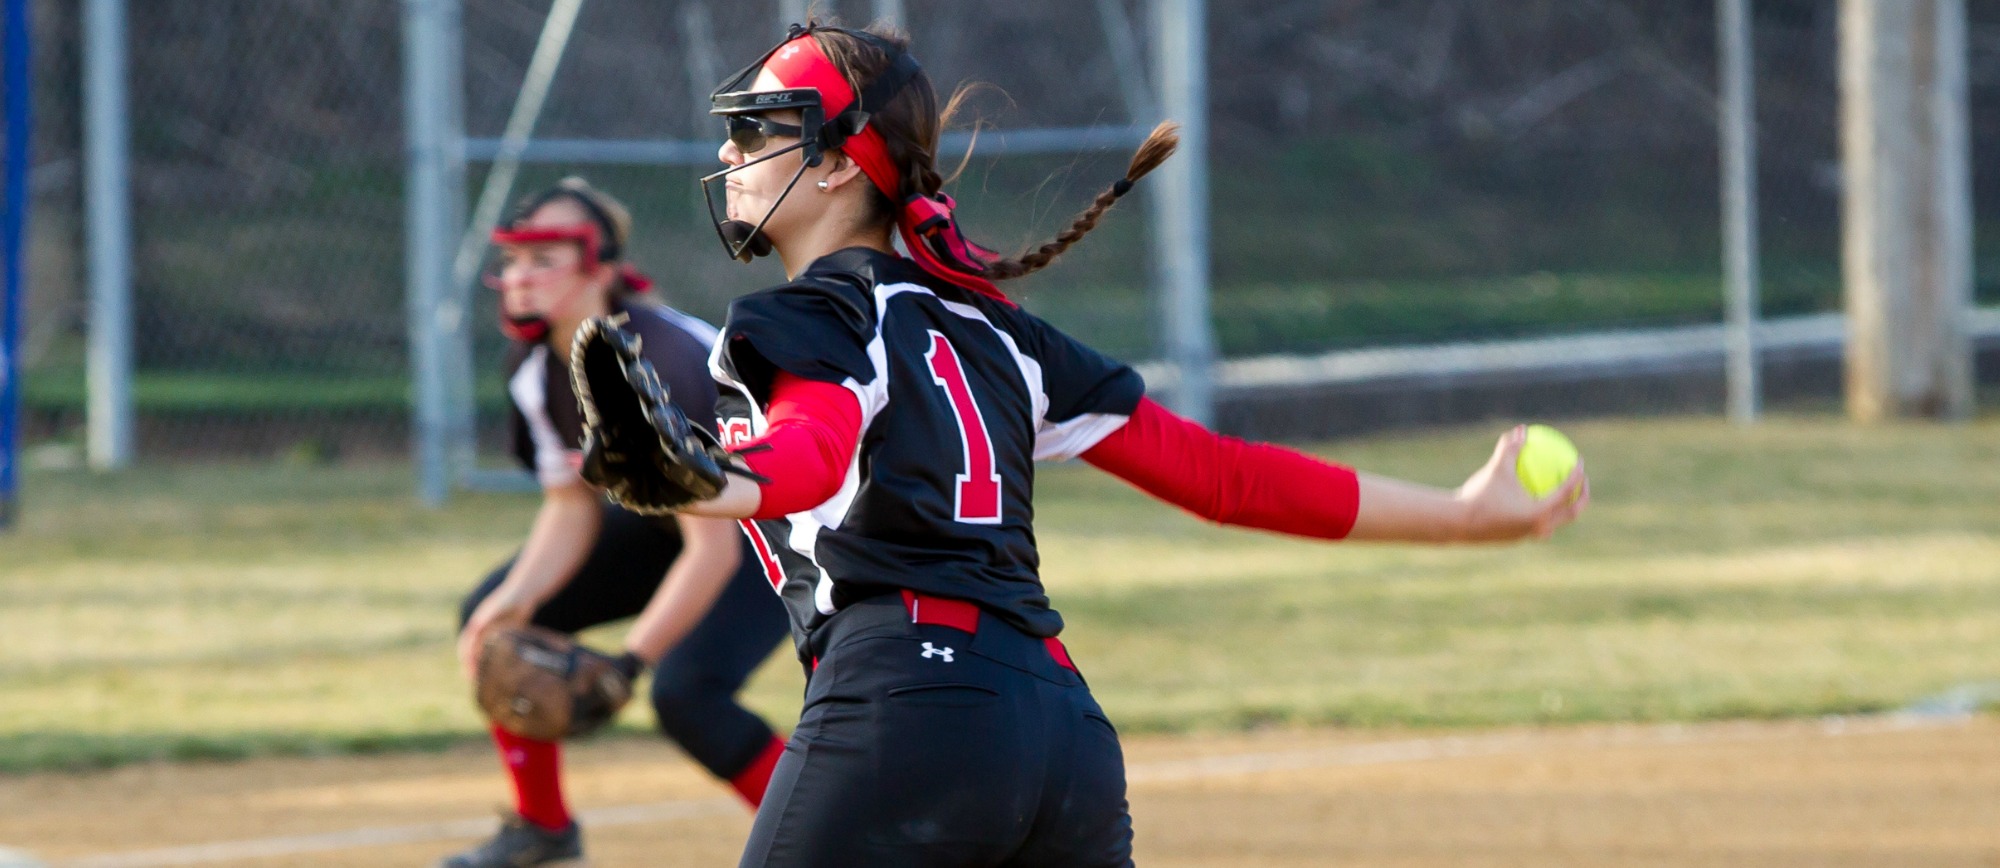 Softball Splits with Anderson University on the Road